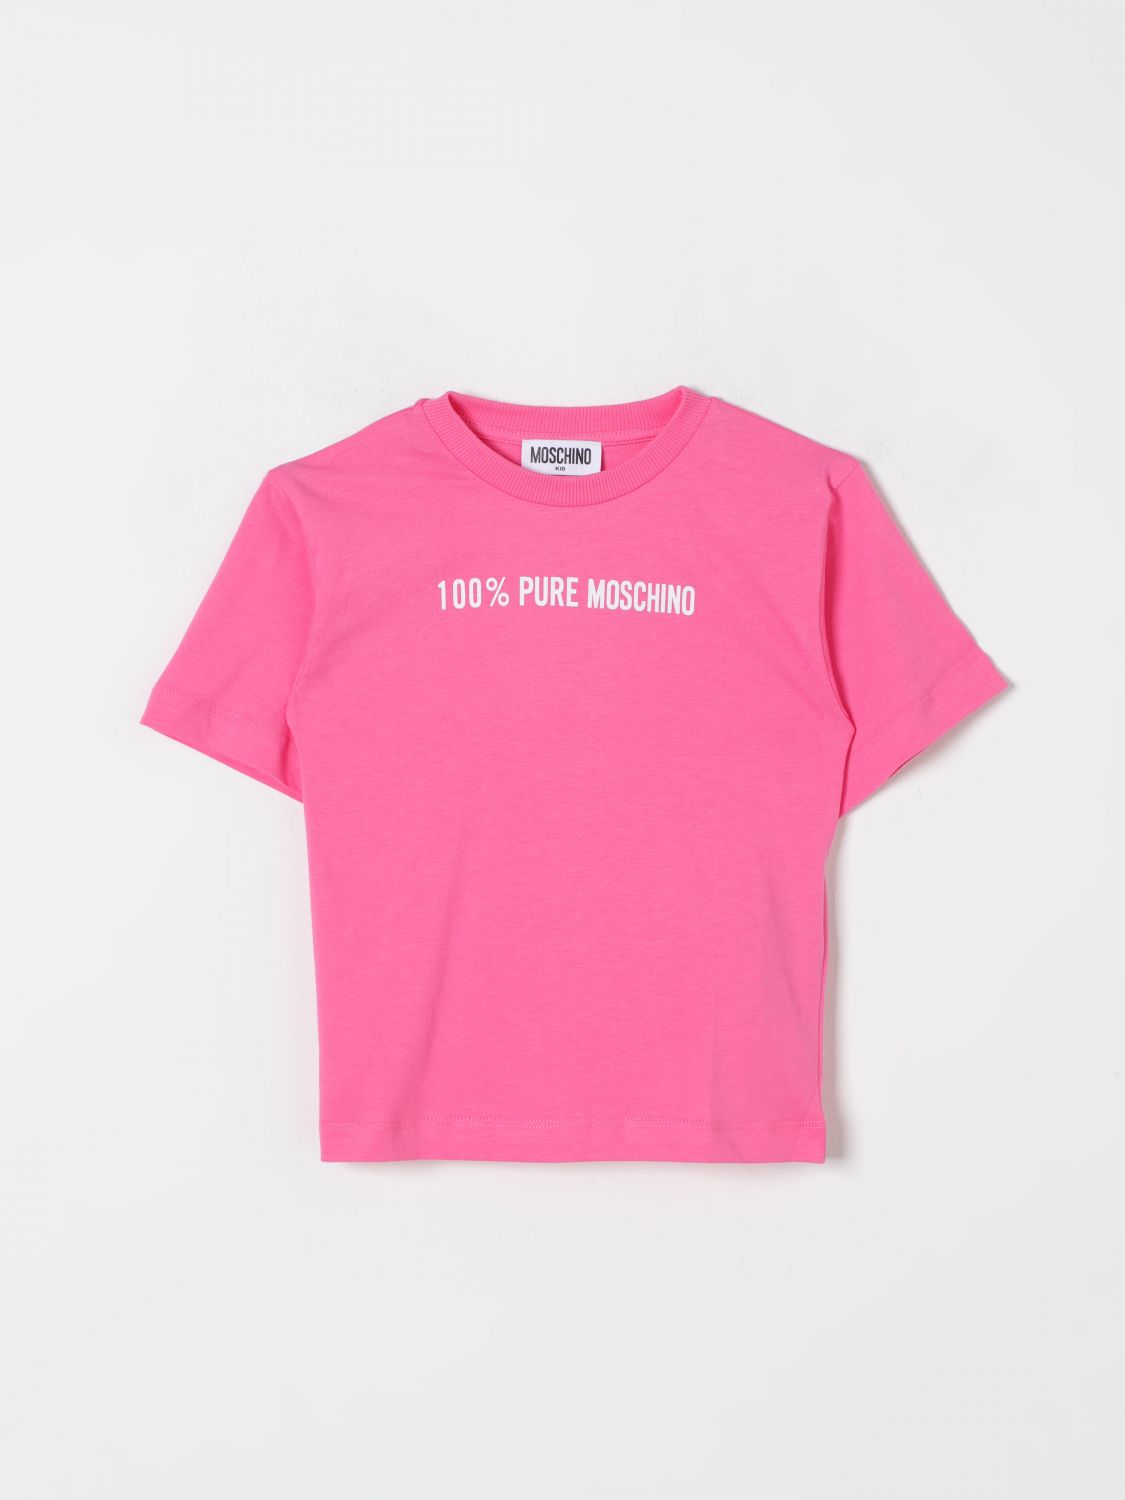 Moschino T-shirt  Kids Color Pink